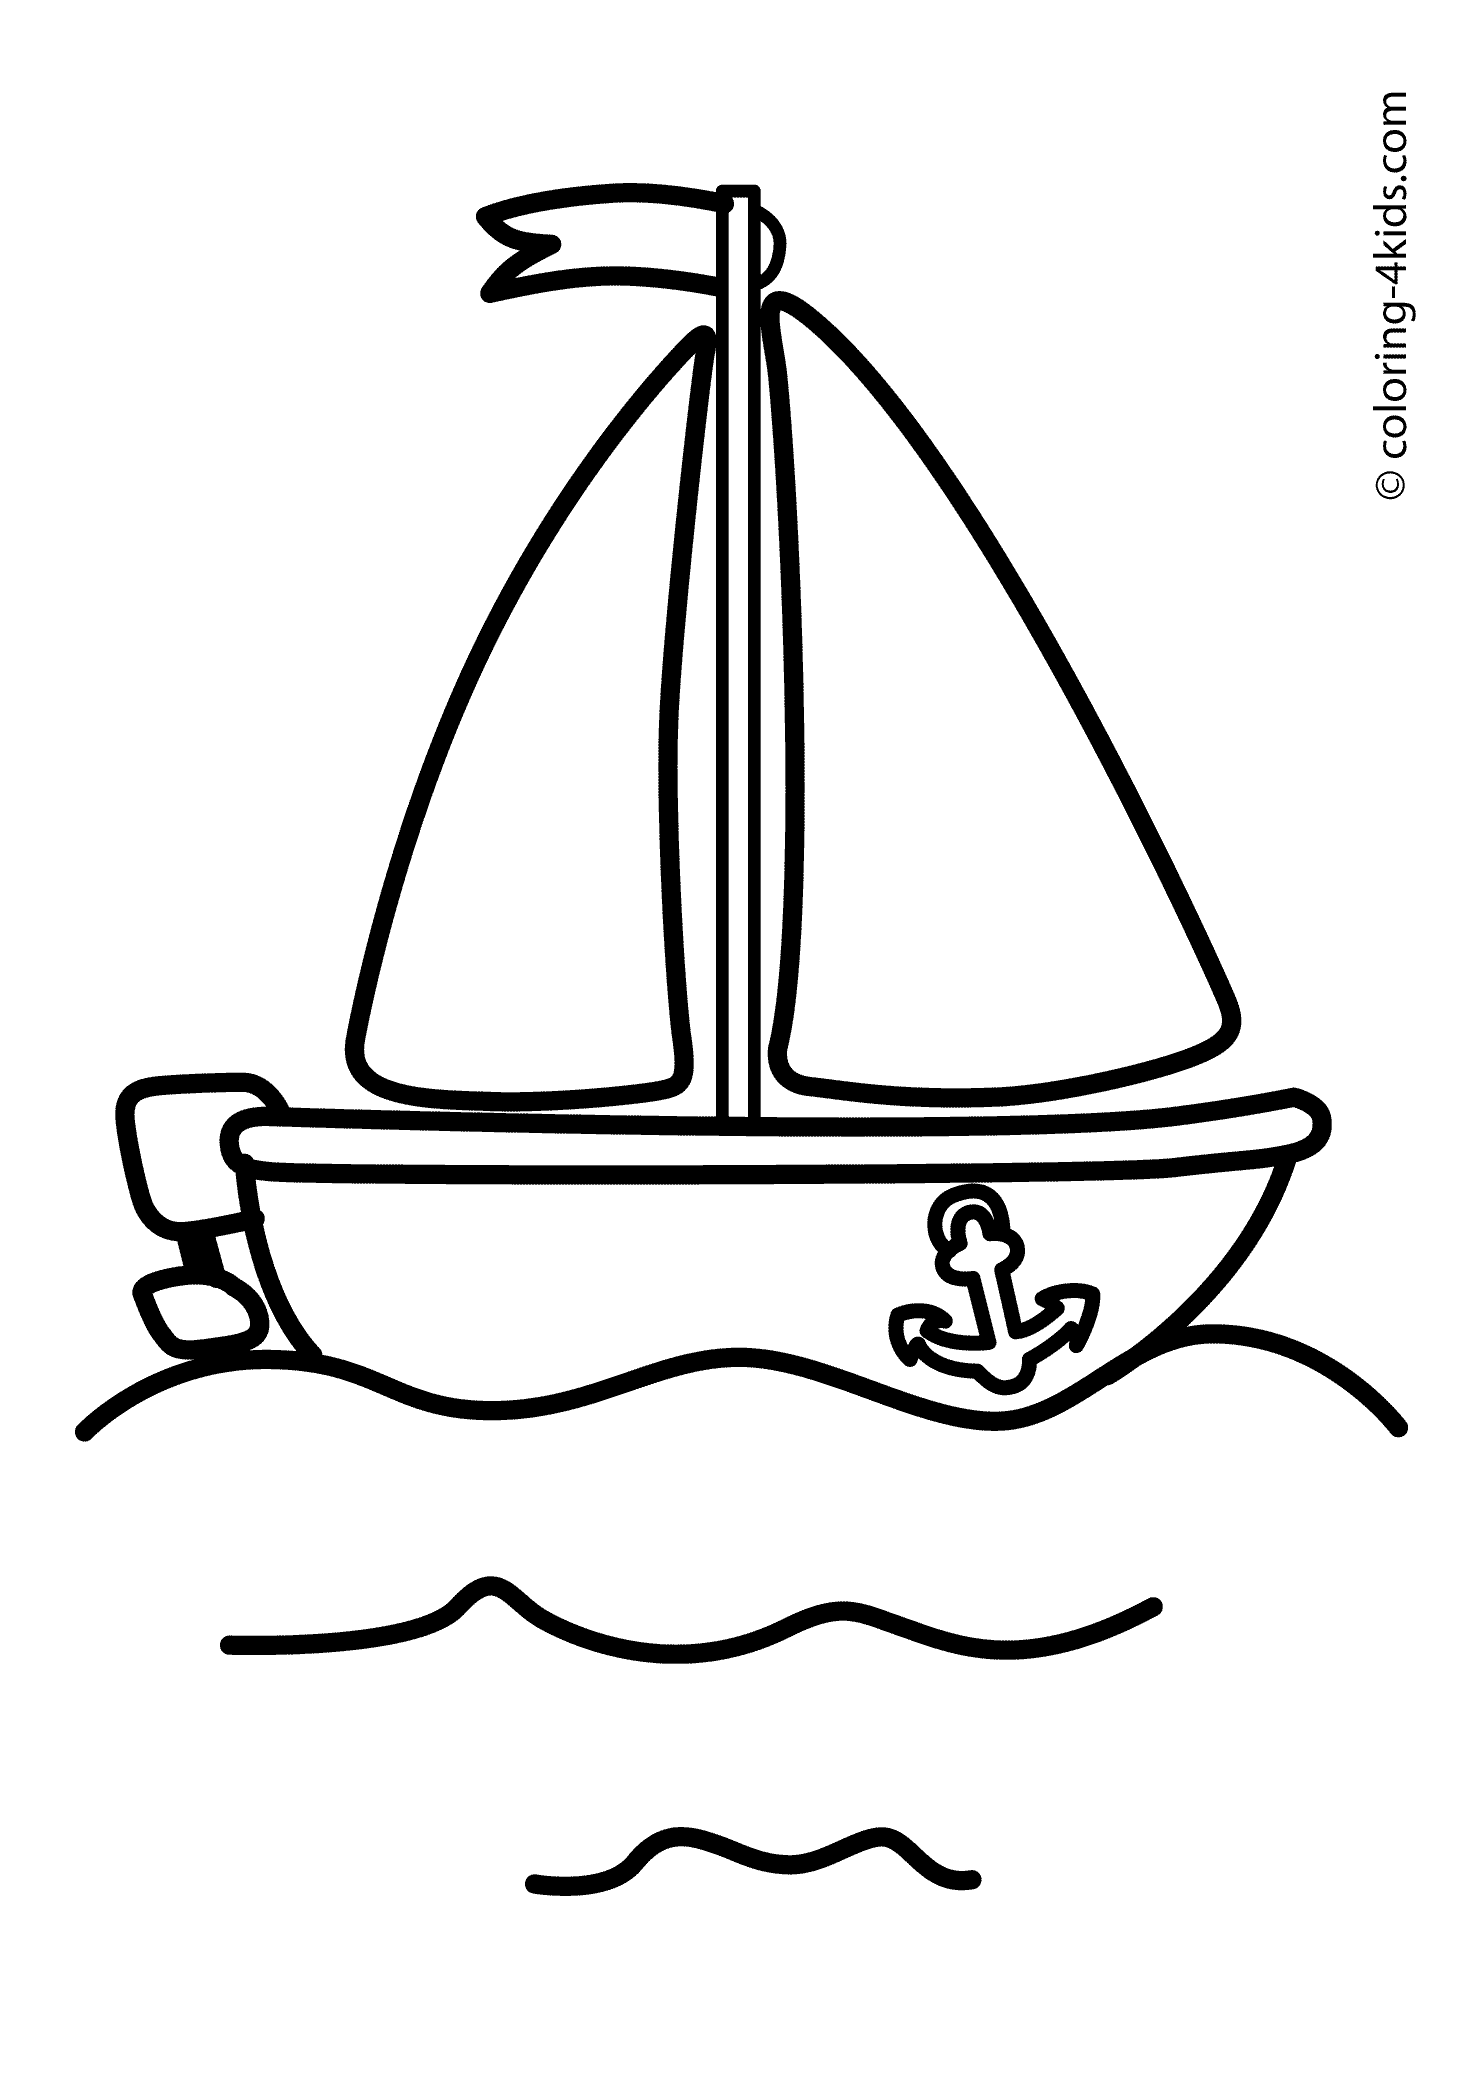 boat-free-coloring-pages-for-kids-12-pics-how-to-draw-in-1-minute